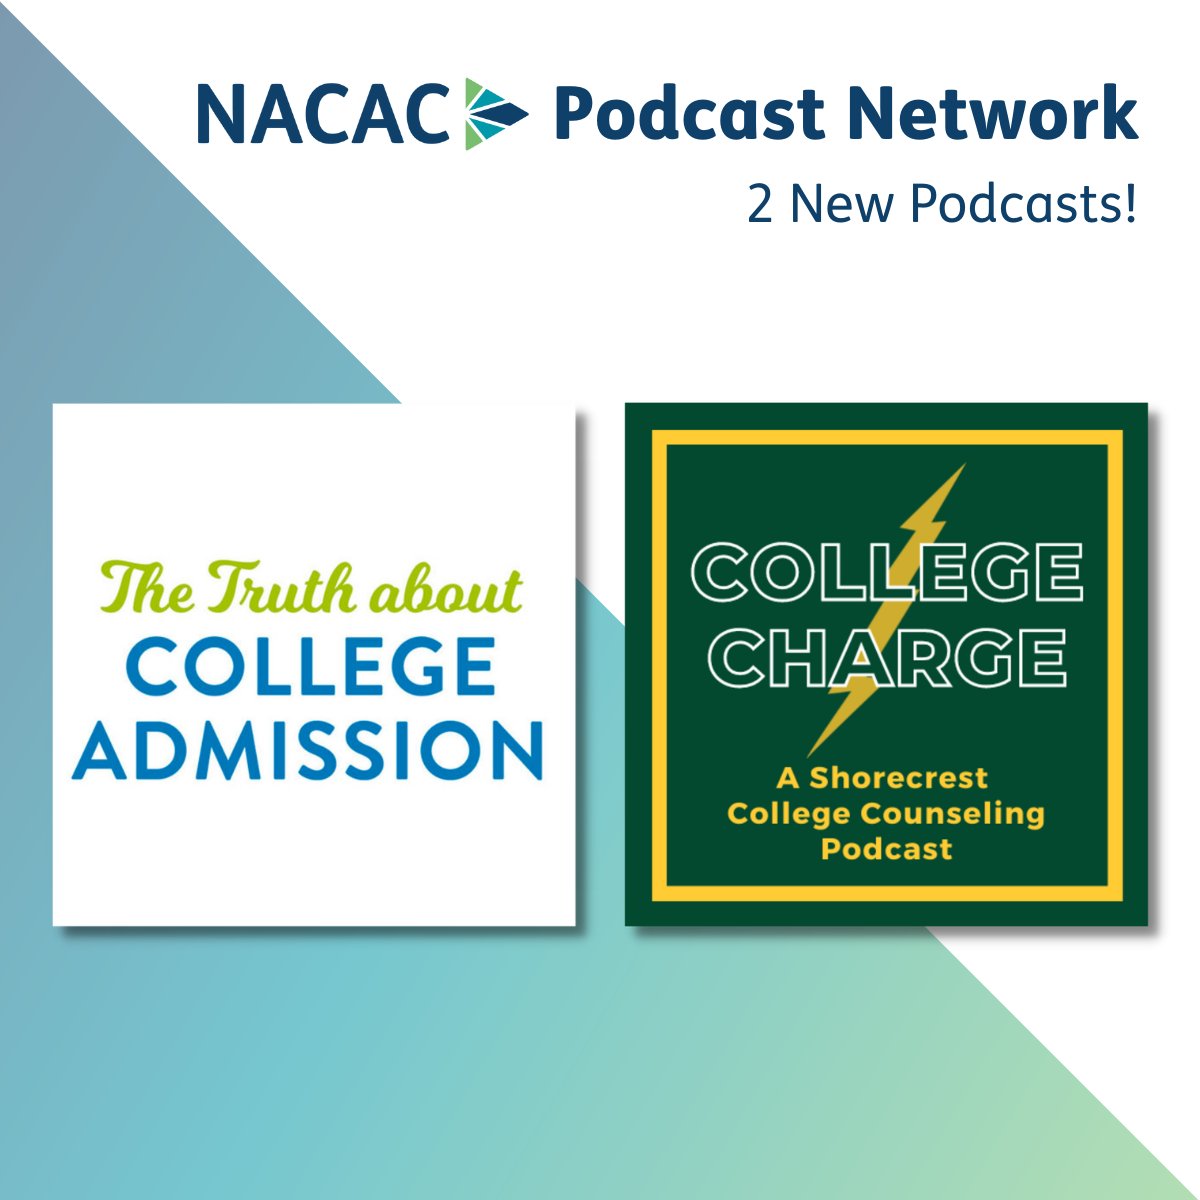 We are pleased to welcome “The Truth about College Admission” and “College Charge” to the #NACAC #Podcast Network. nacacnet.org/membership/mem… @Clark2College @BarnardBrennan @Shorecrest